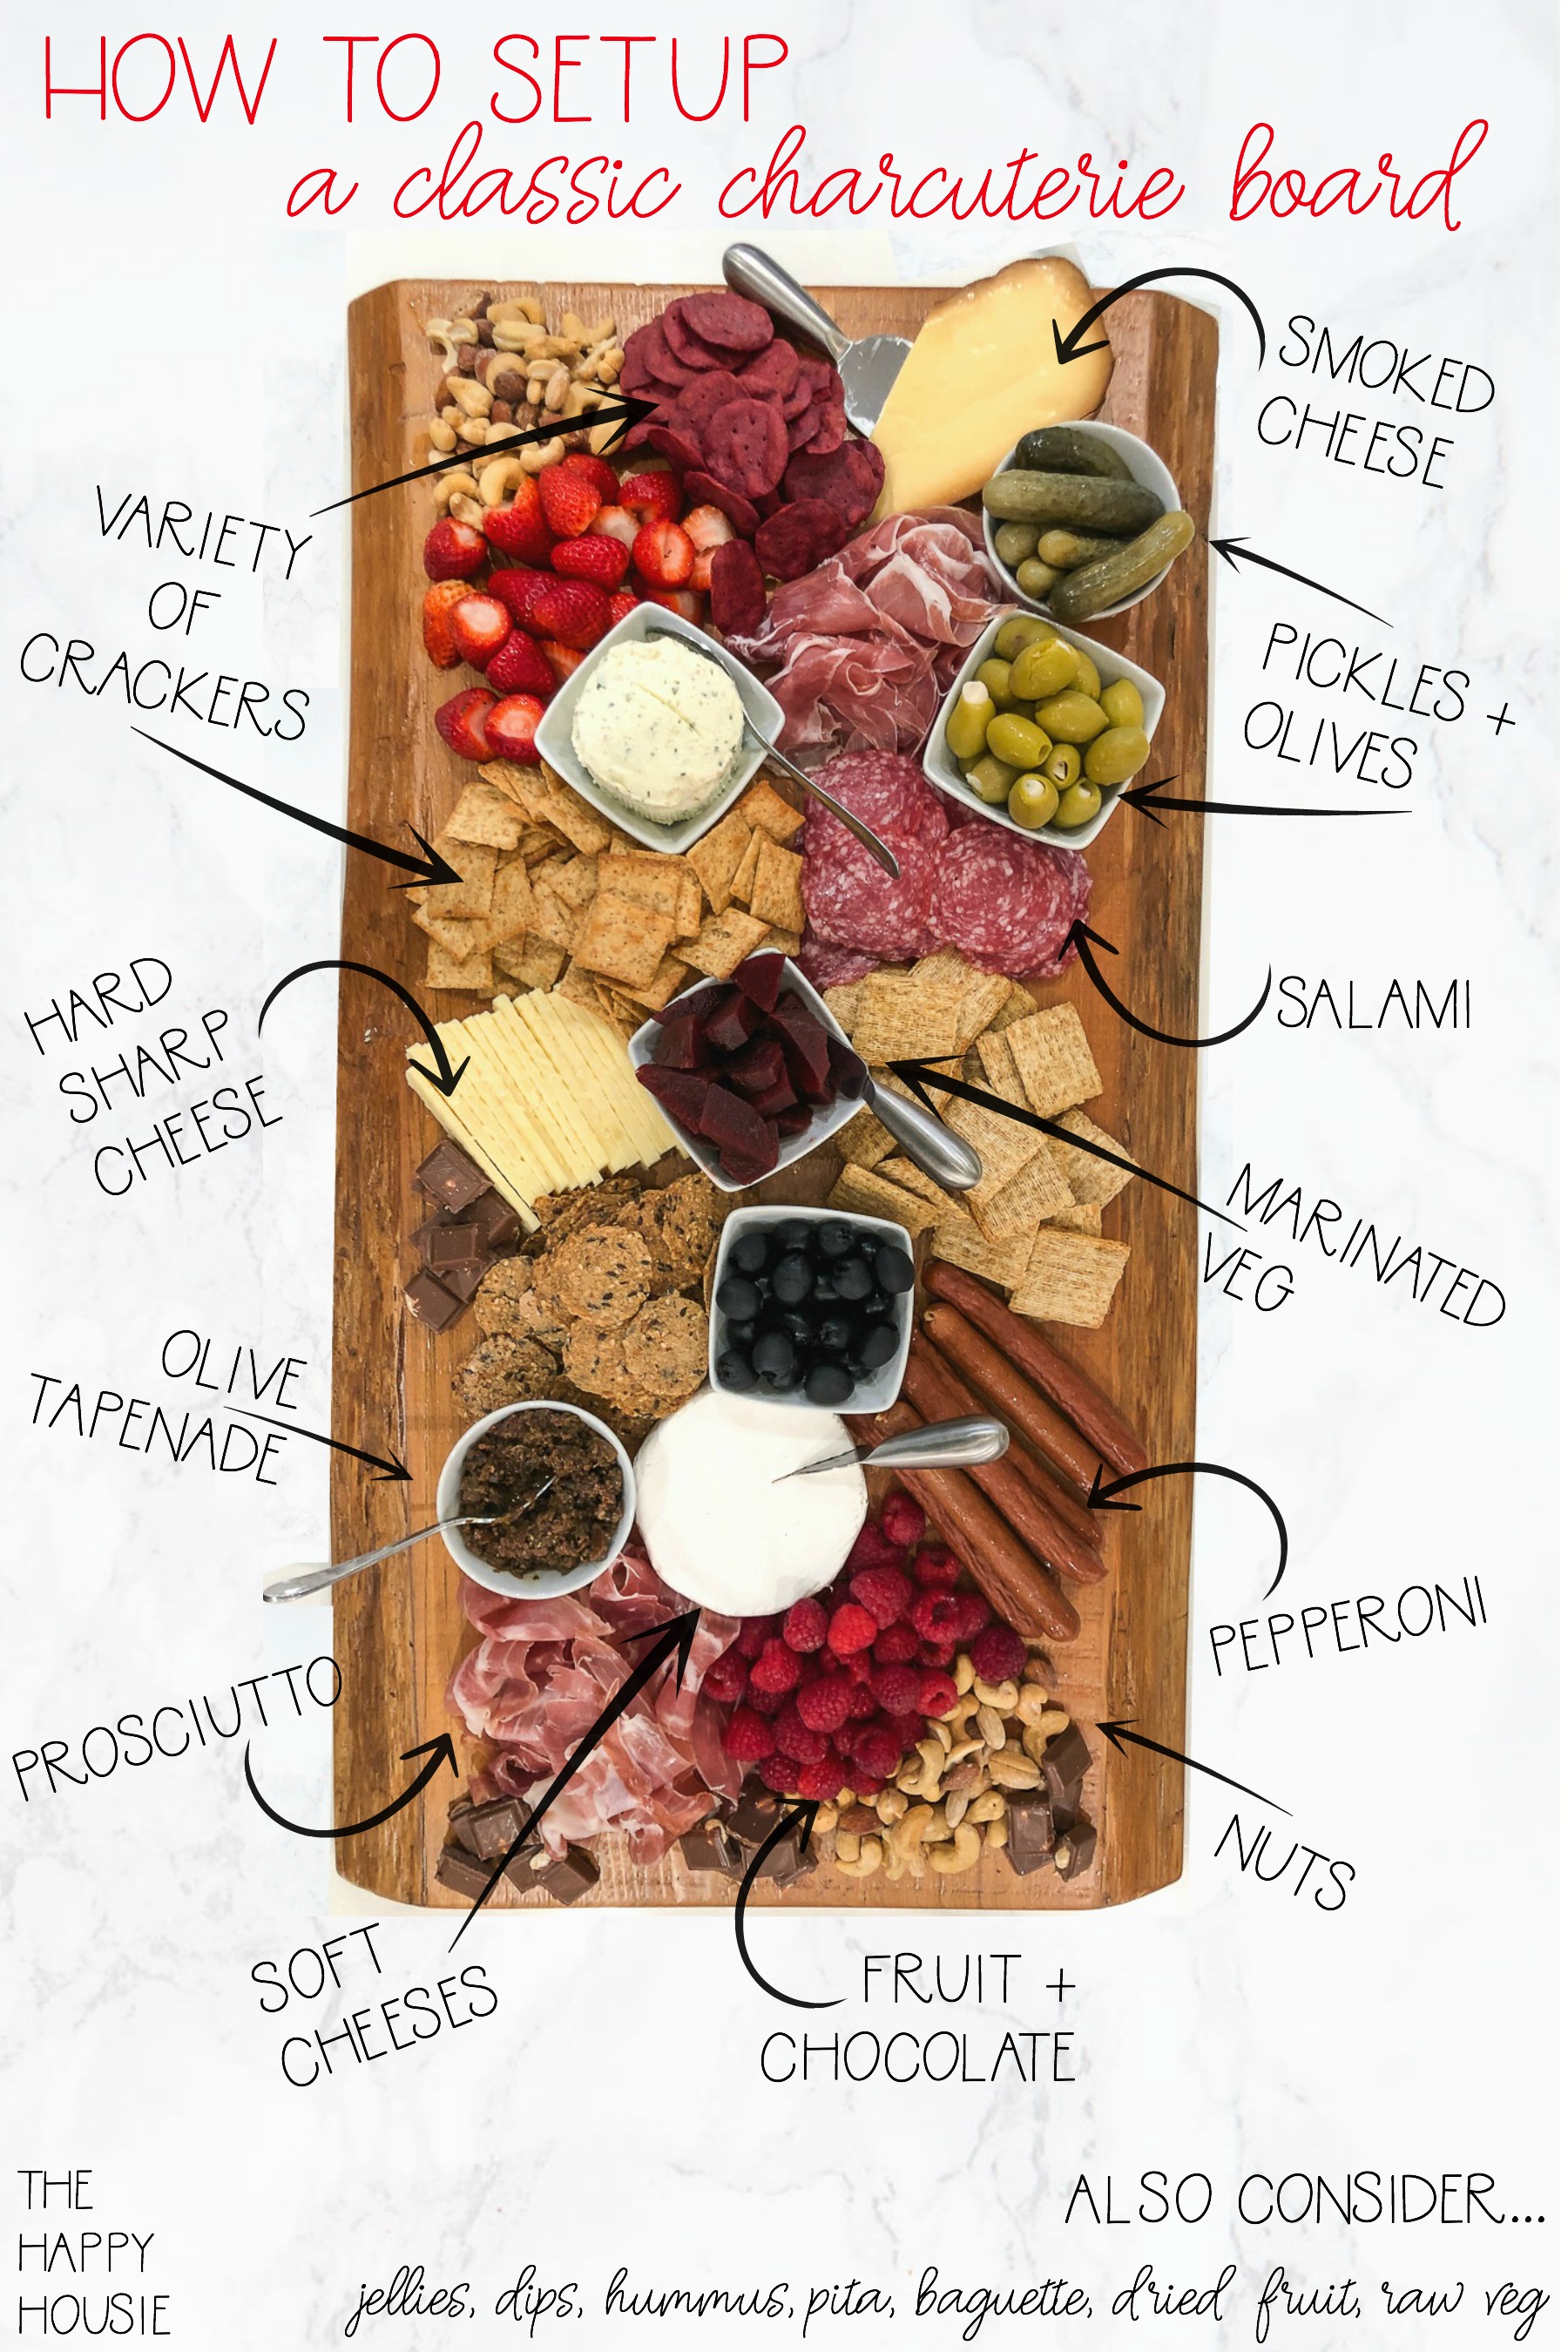 https://www.thehappyhousie.com/wp-content/uploads/2019/12/How-to-Setup-a-Classic-Charcuterie-Board-the-perfect-thing-to-serve-your-party-or-holiday-guests.jpg